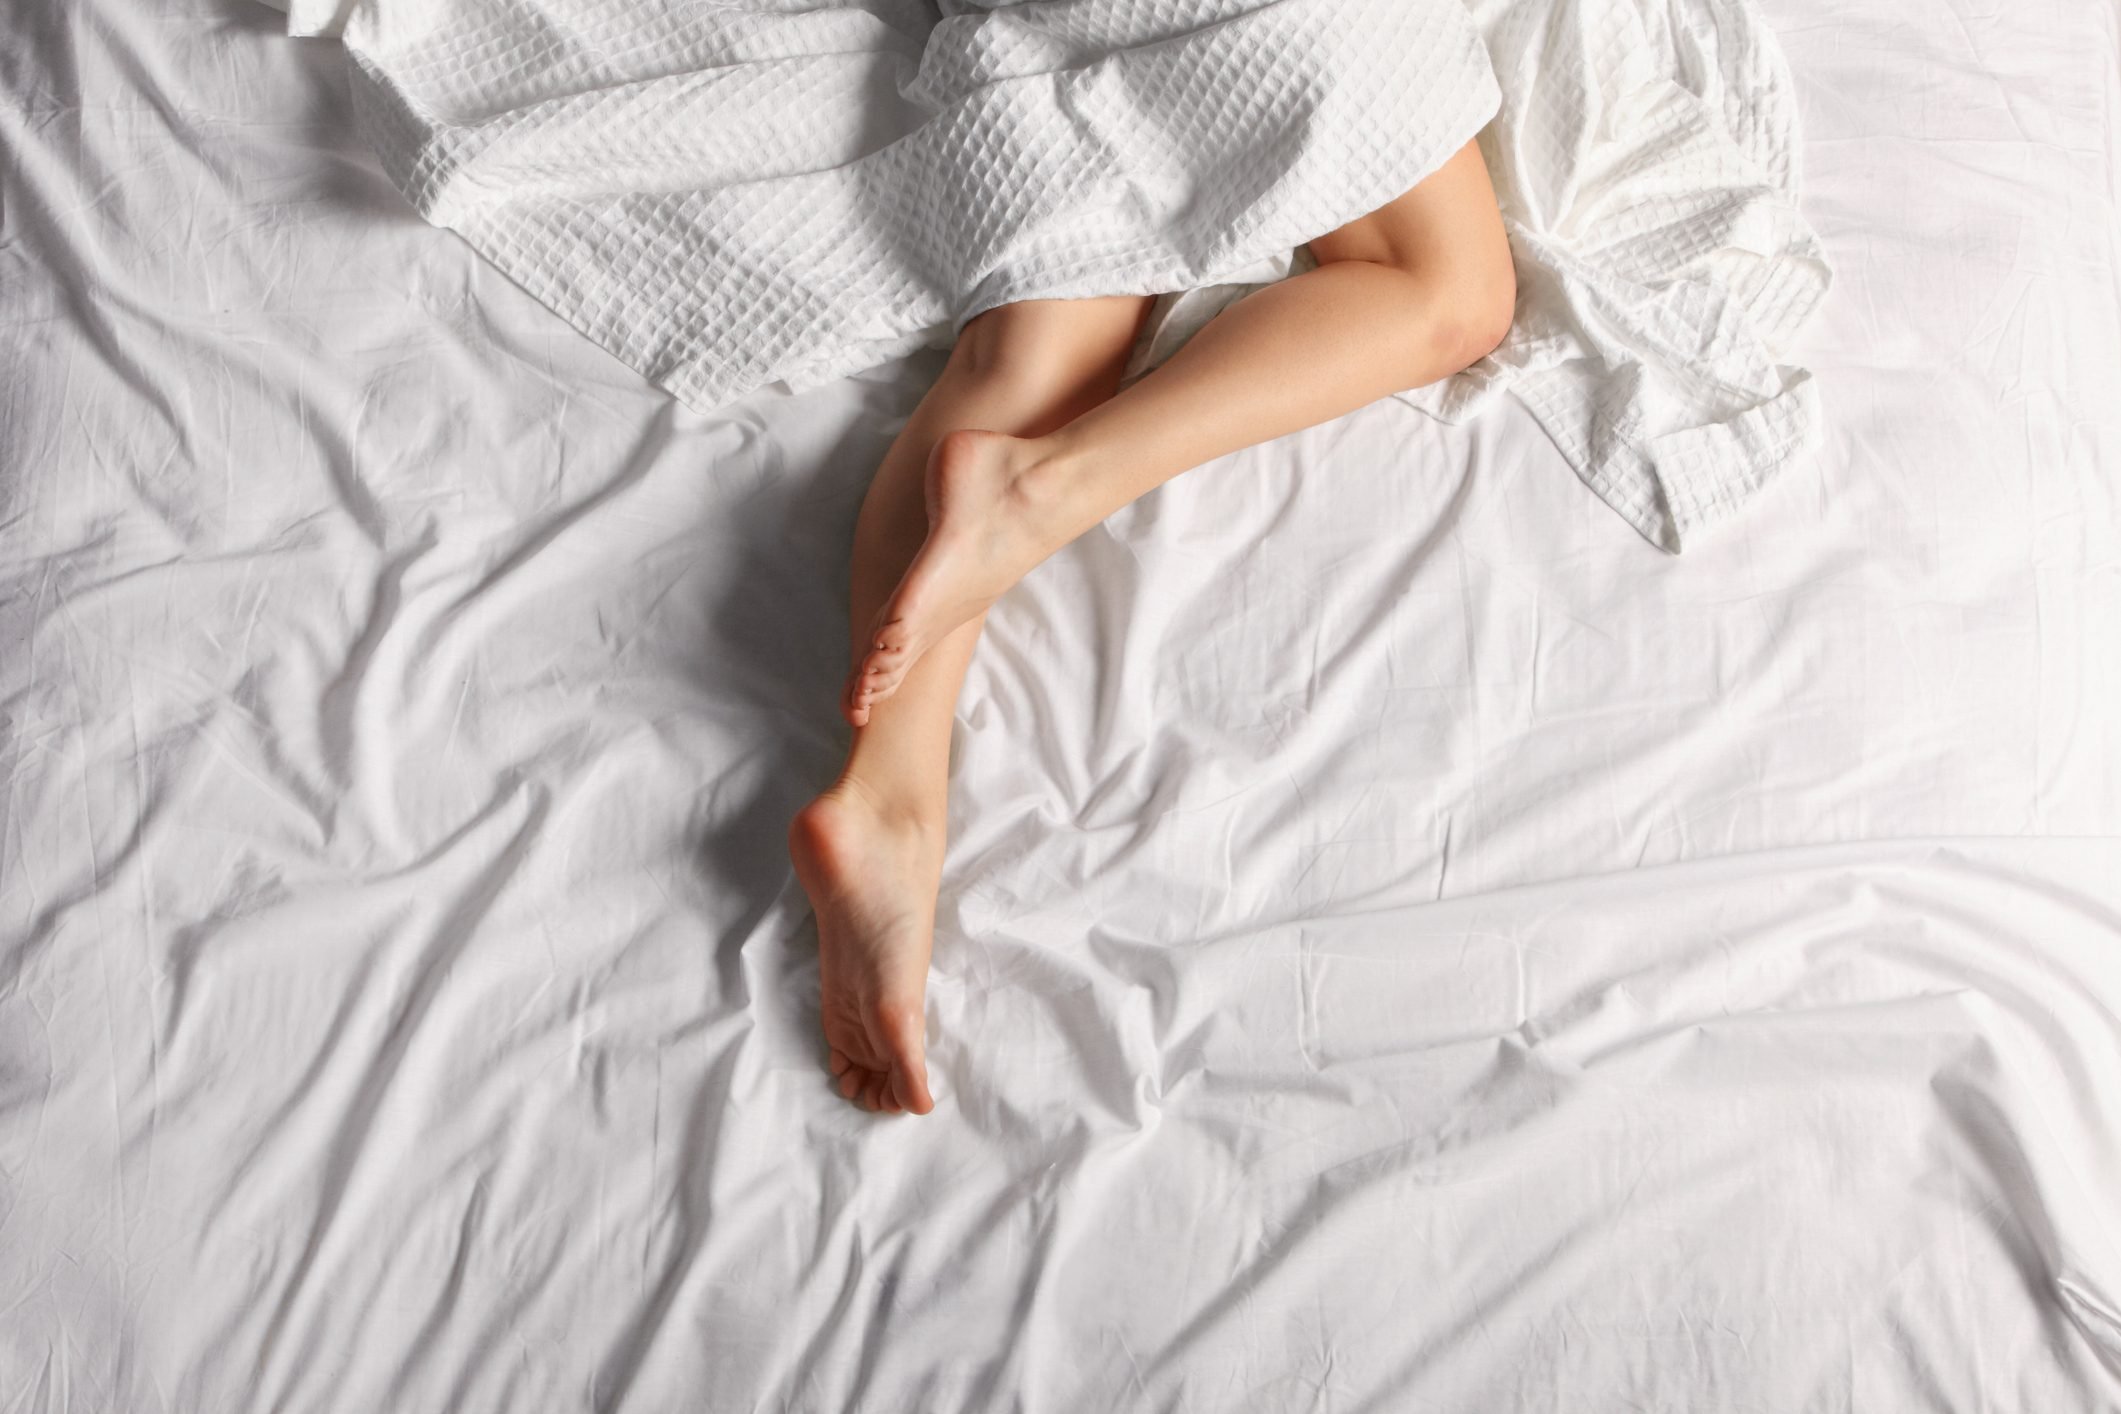 Should You Sleep In Underwear Or Go Commando? Doctors Have Thoughts.